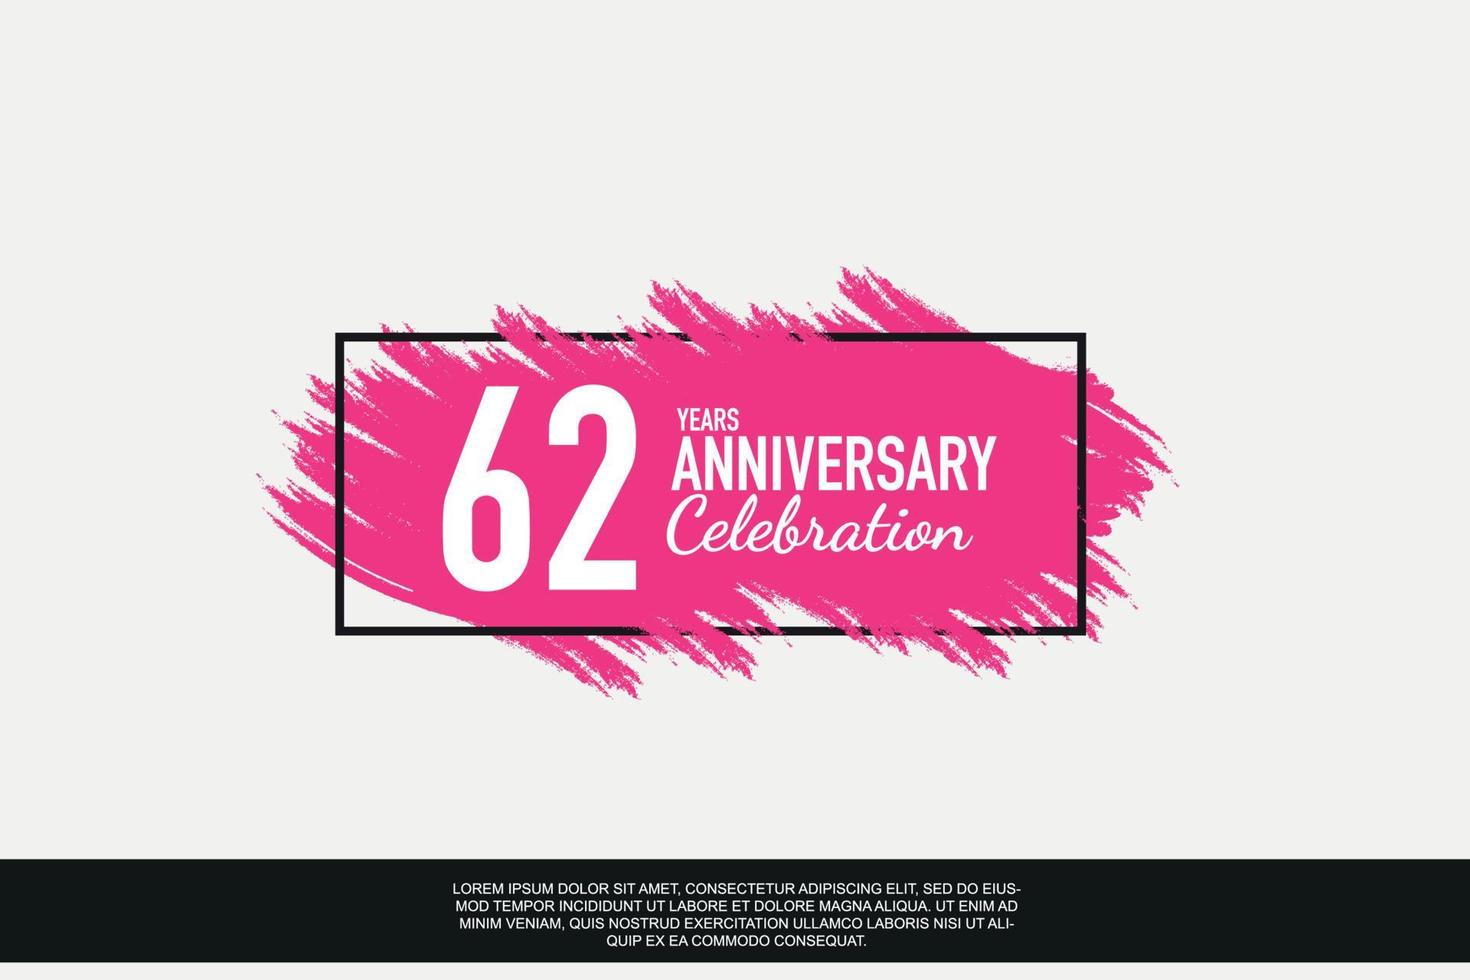 62 year anniversary celebration vector pink design in black frame on white background abstract illustration logo